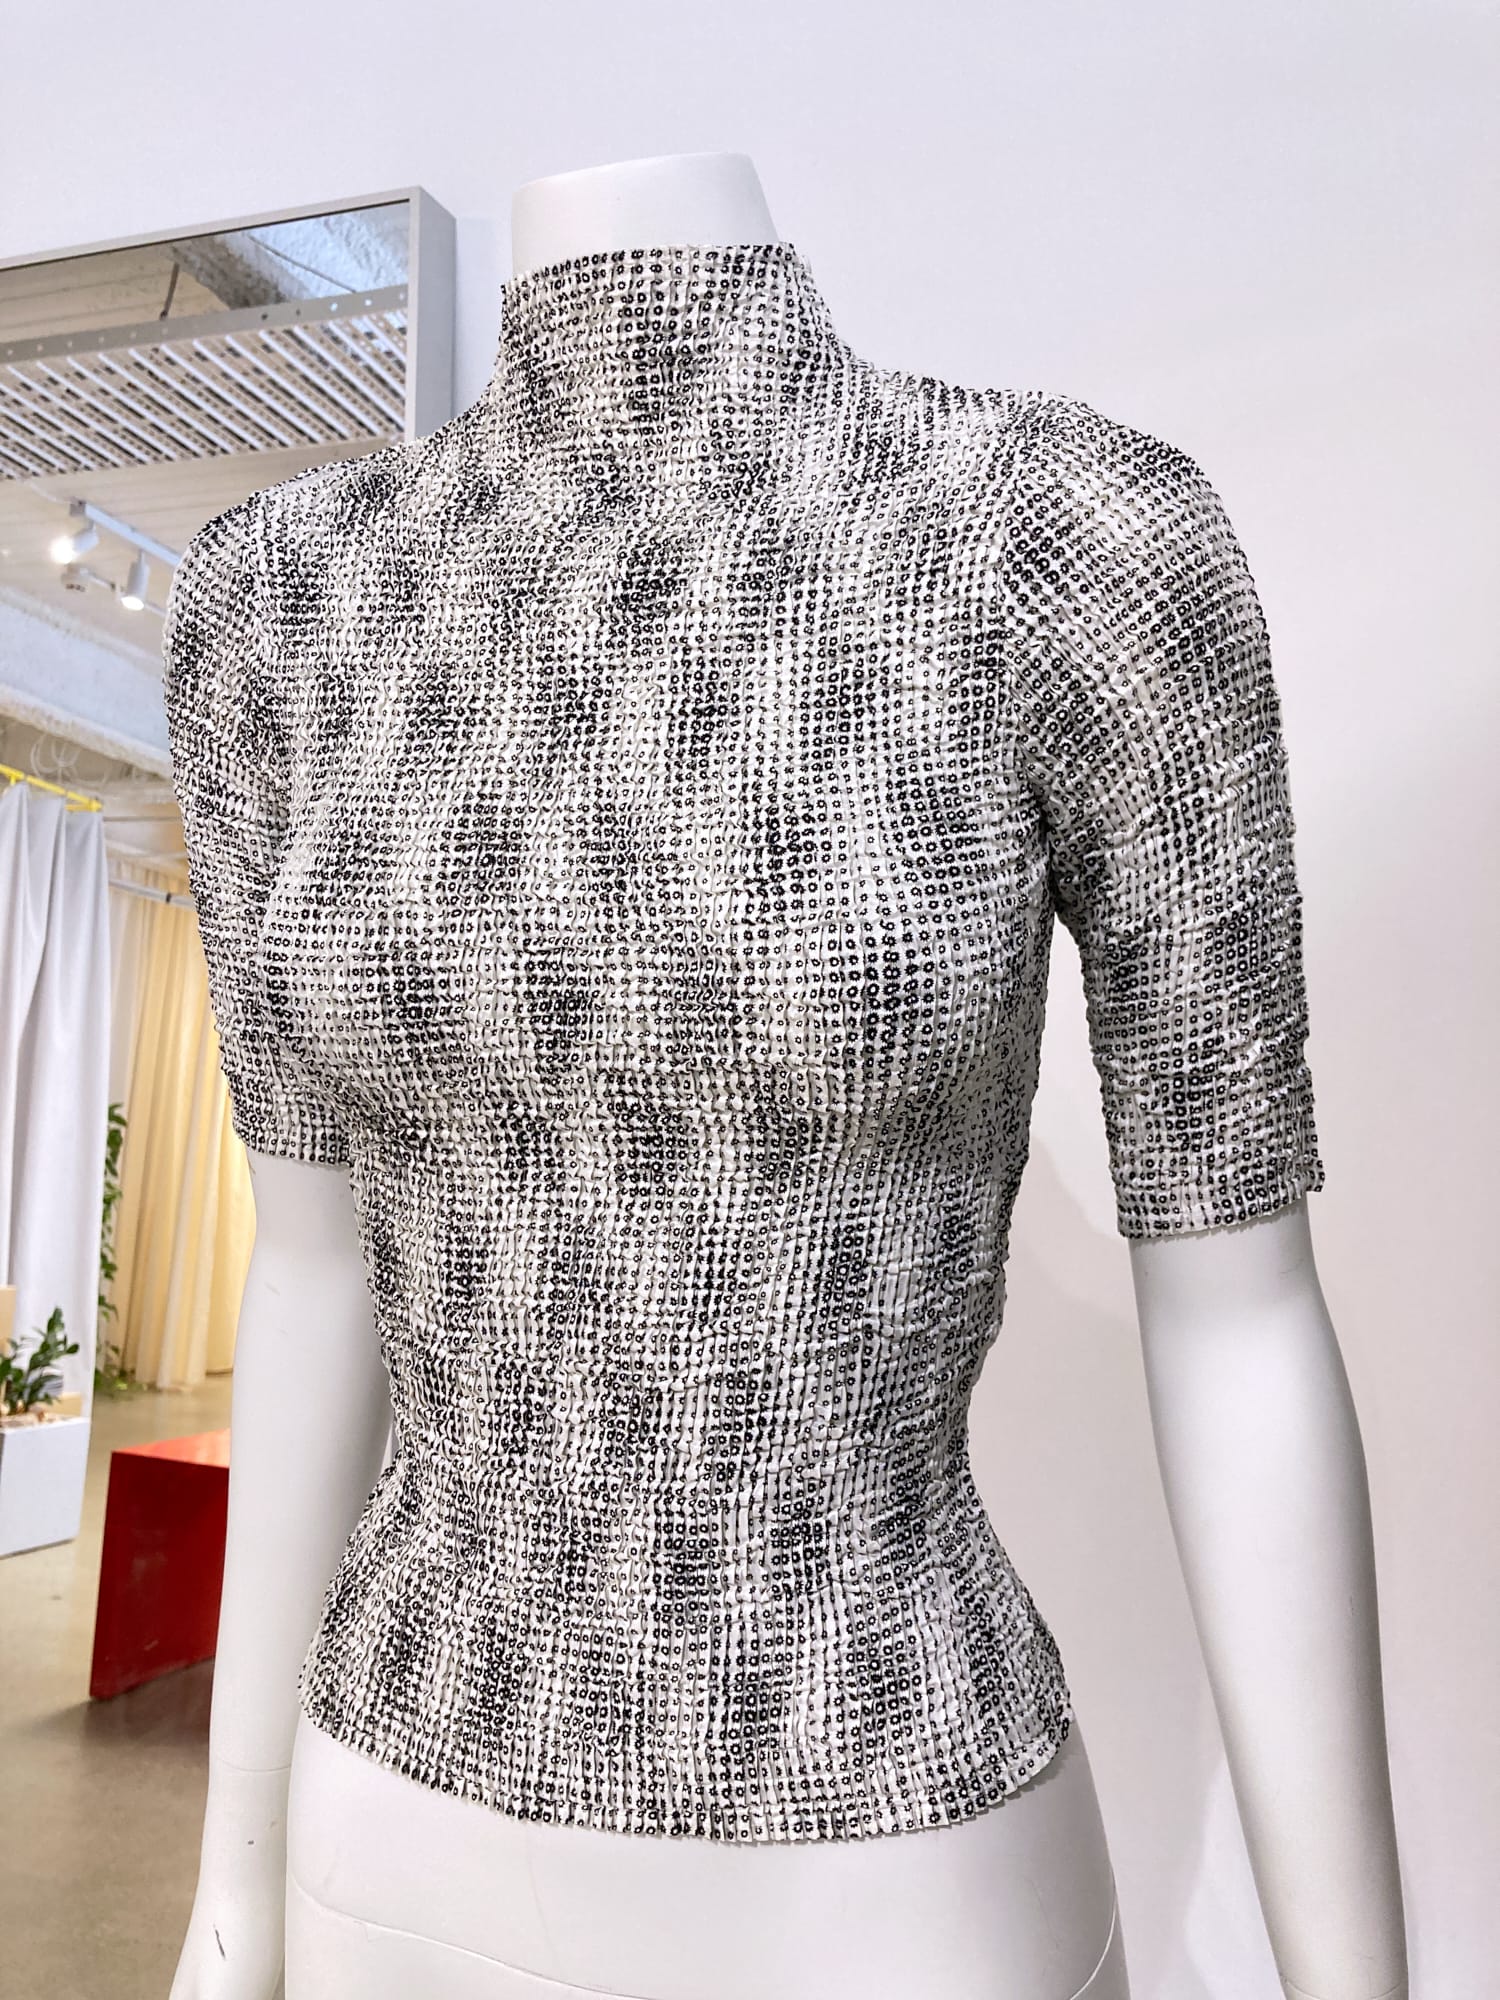 Wrinqle Inoue Pleats black and white dot pattern pleated poly mock neck top